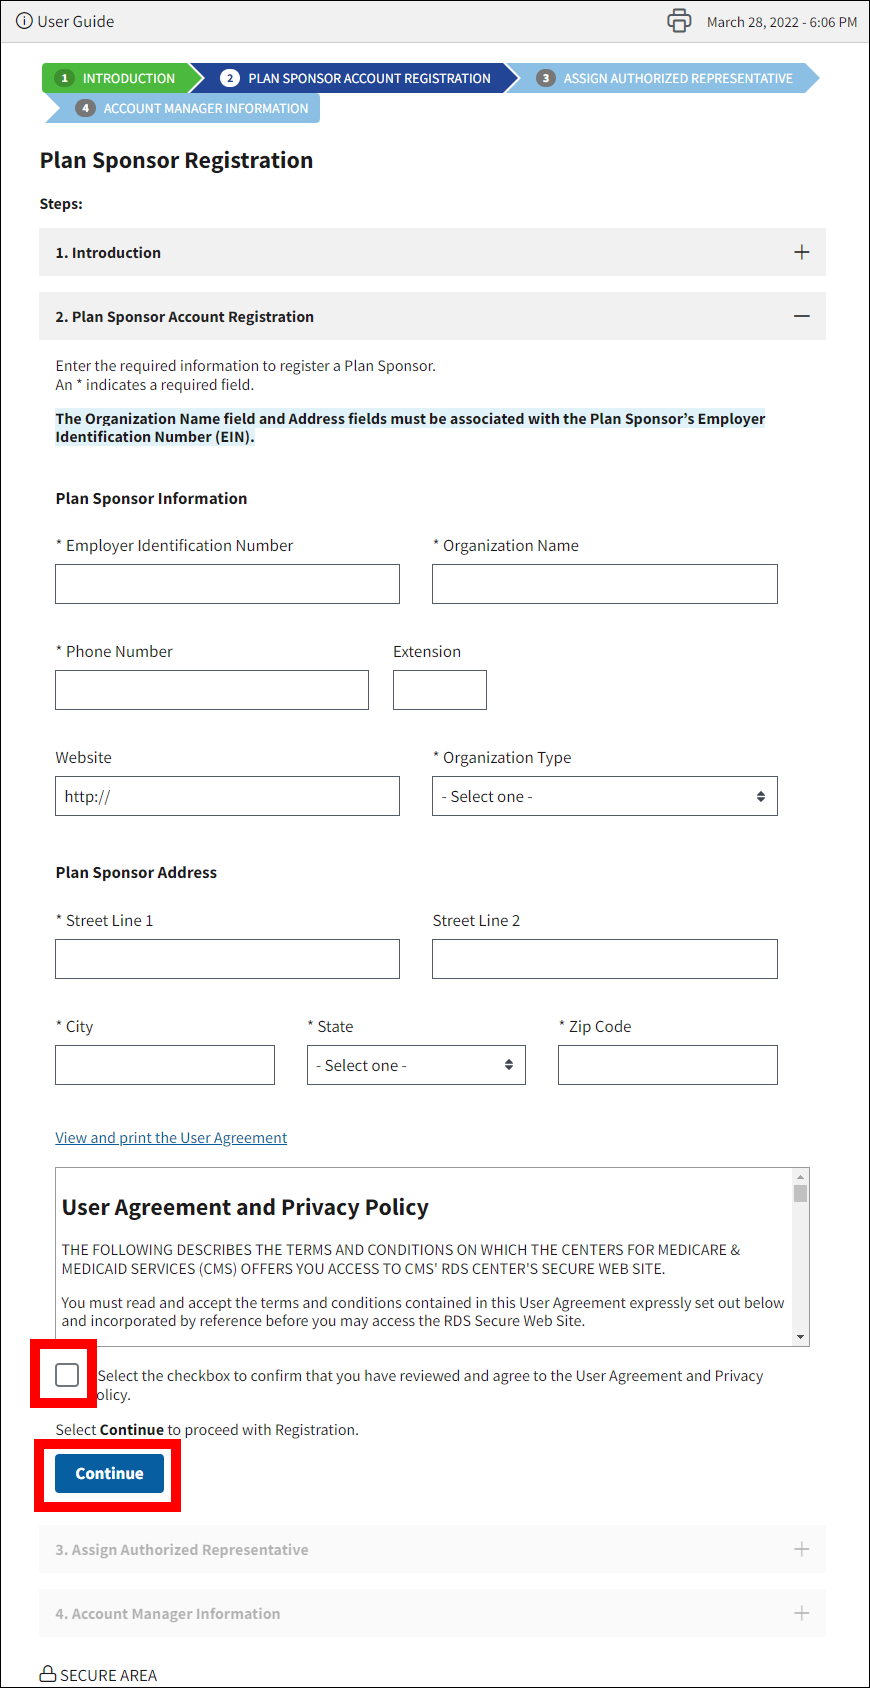 Plan Sponsor Account Registration section of Plan Sponsor Registration page. User Agreement checkbox and Continue button are highlighted.